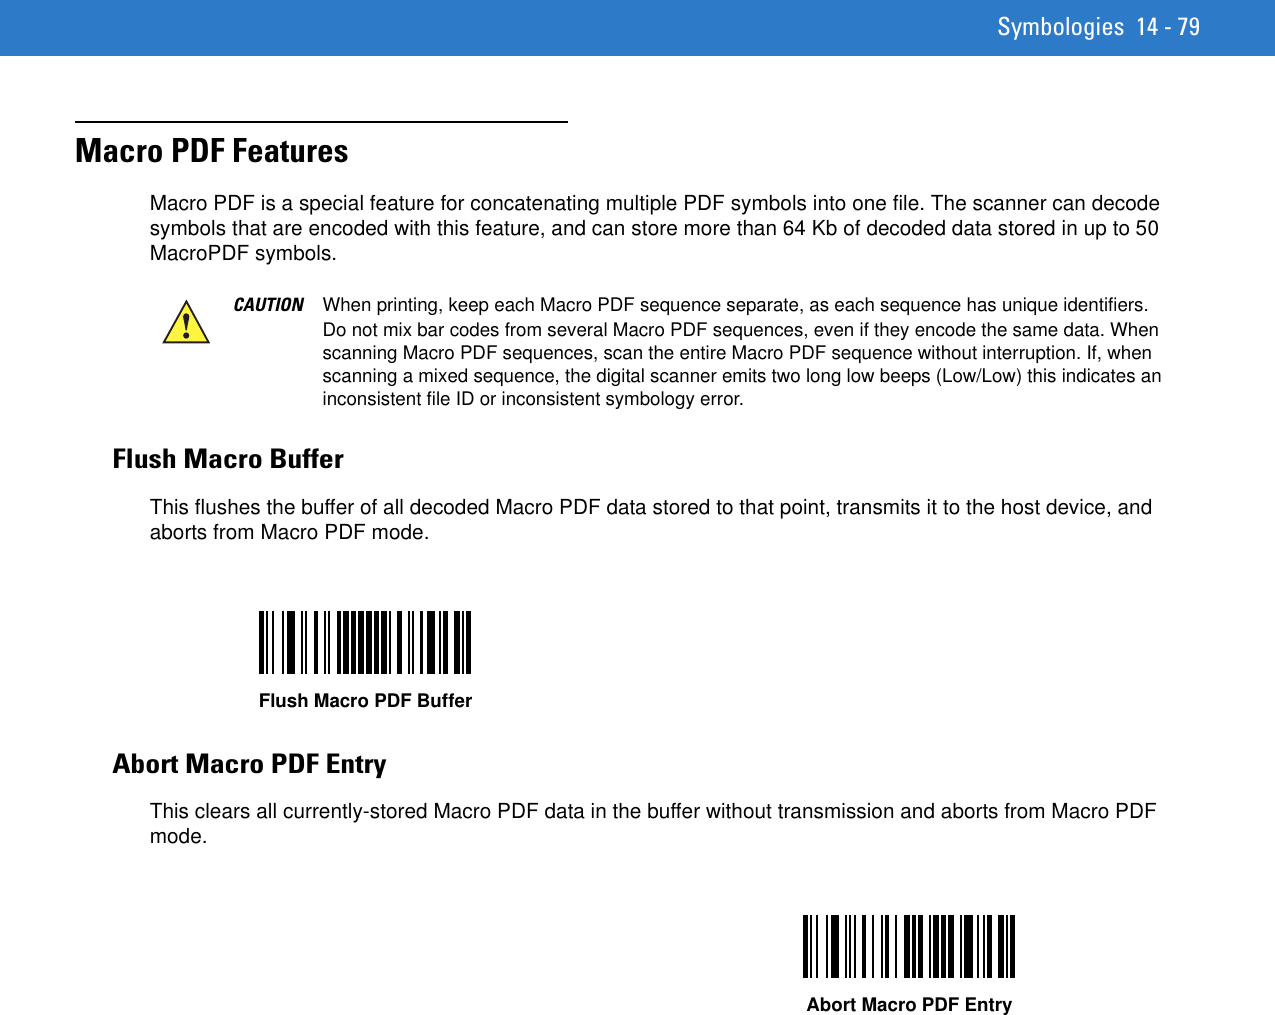 Symbologies 14 - 79Macro PDF Features Macro PDF is a special feature for concatenating multiple PDF symbols into one file. The scanner can decode symbols that are encoded with this feature, and can store more than 64 Kb of decoded data stored in up to 50 MacroPDF symbols.Flush Macro BufferThis flushes the buffer of all decoded Macro PDF data stored to that point, transmits it to the host device, and aborts from Macro PDF mode. Abort Macro PDF EntryThis clears all currently-stored Macro PDF data in the buffer without transmission and aborts from Macro PDF mode. CAUTION When printing, keep each Macro PDF sequence separate, as each sequence has unique identifiers. Do not mix bar codes from several Macro PDF sequences, even if they encode the same data. When scanning Macro PDF sequences, scan the entire Macro PDF sequence without interruption. If, when scanning a mixed sequence, the digital scanner emits two long low beeps (Low/Low) this indicates an inconsistent file ID or inconsistent symbology error. Flush Macro PDF BufferAbort Macro PDF Entry